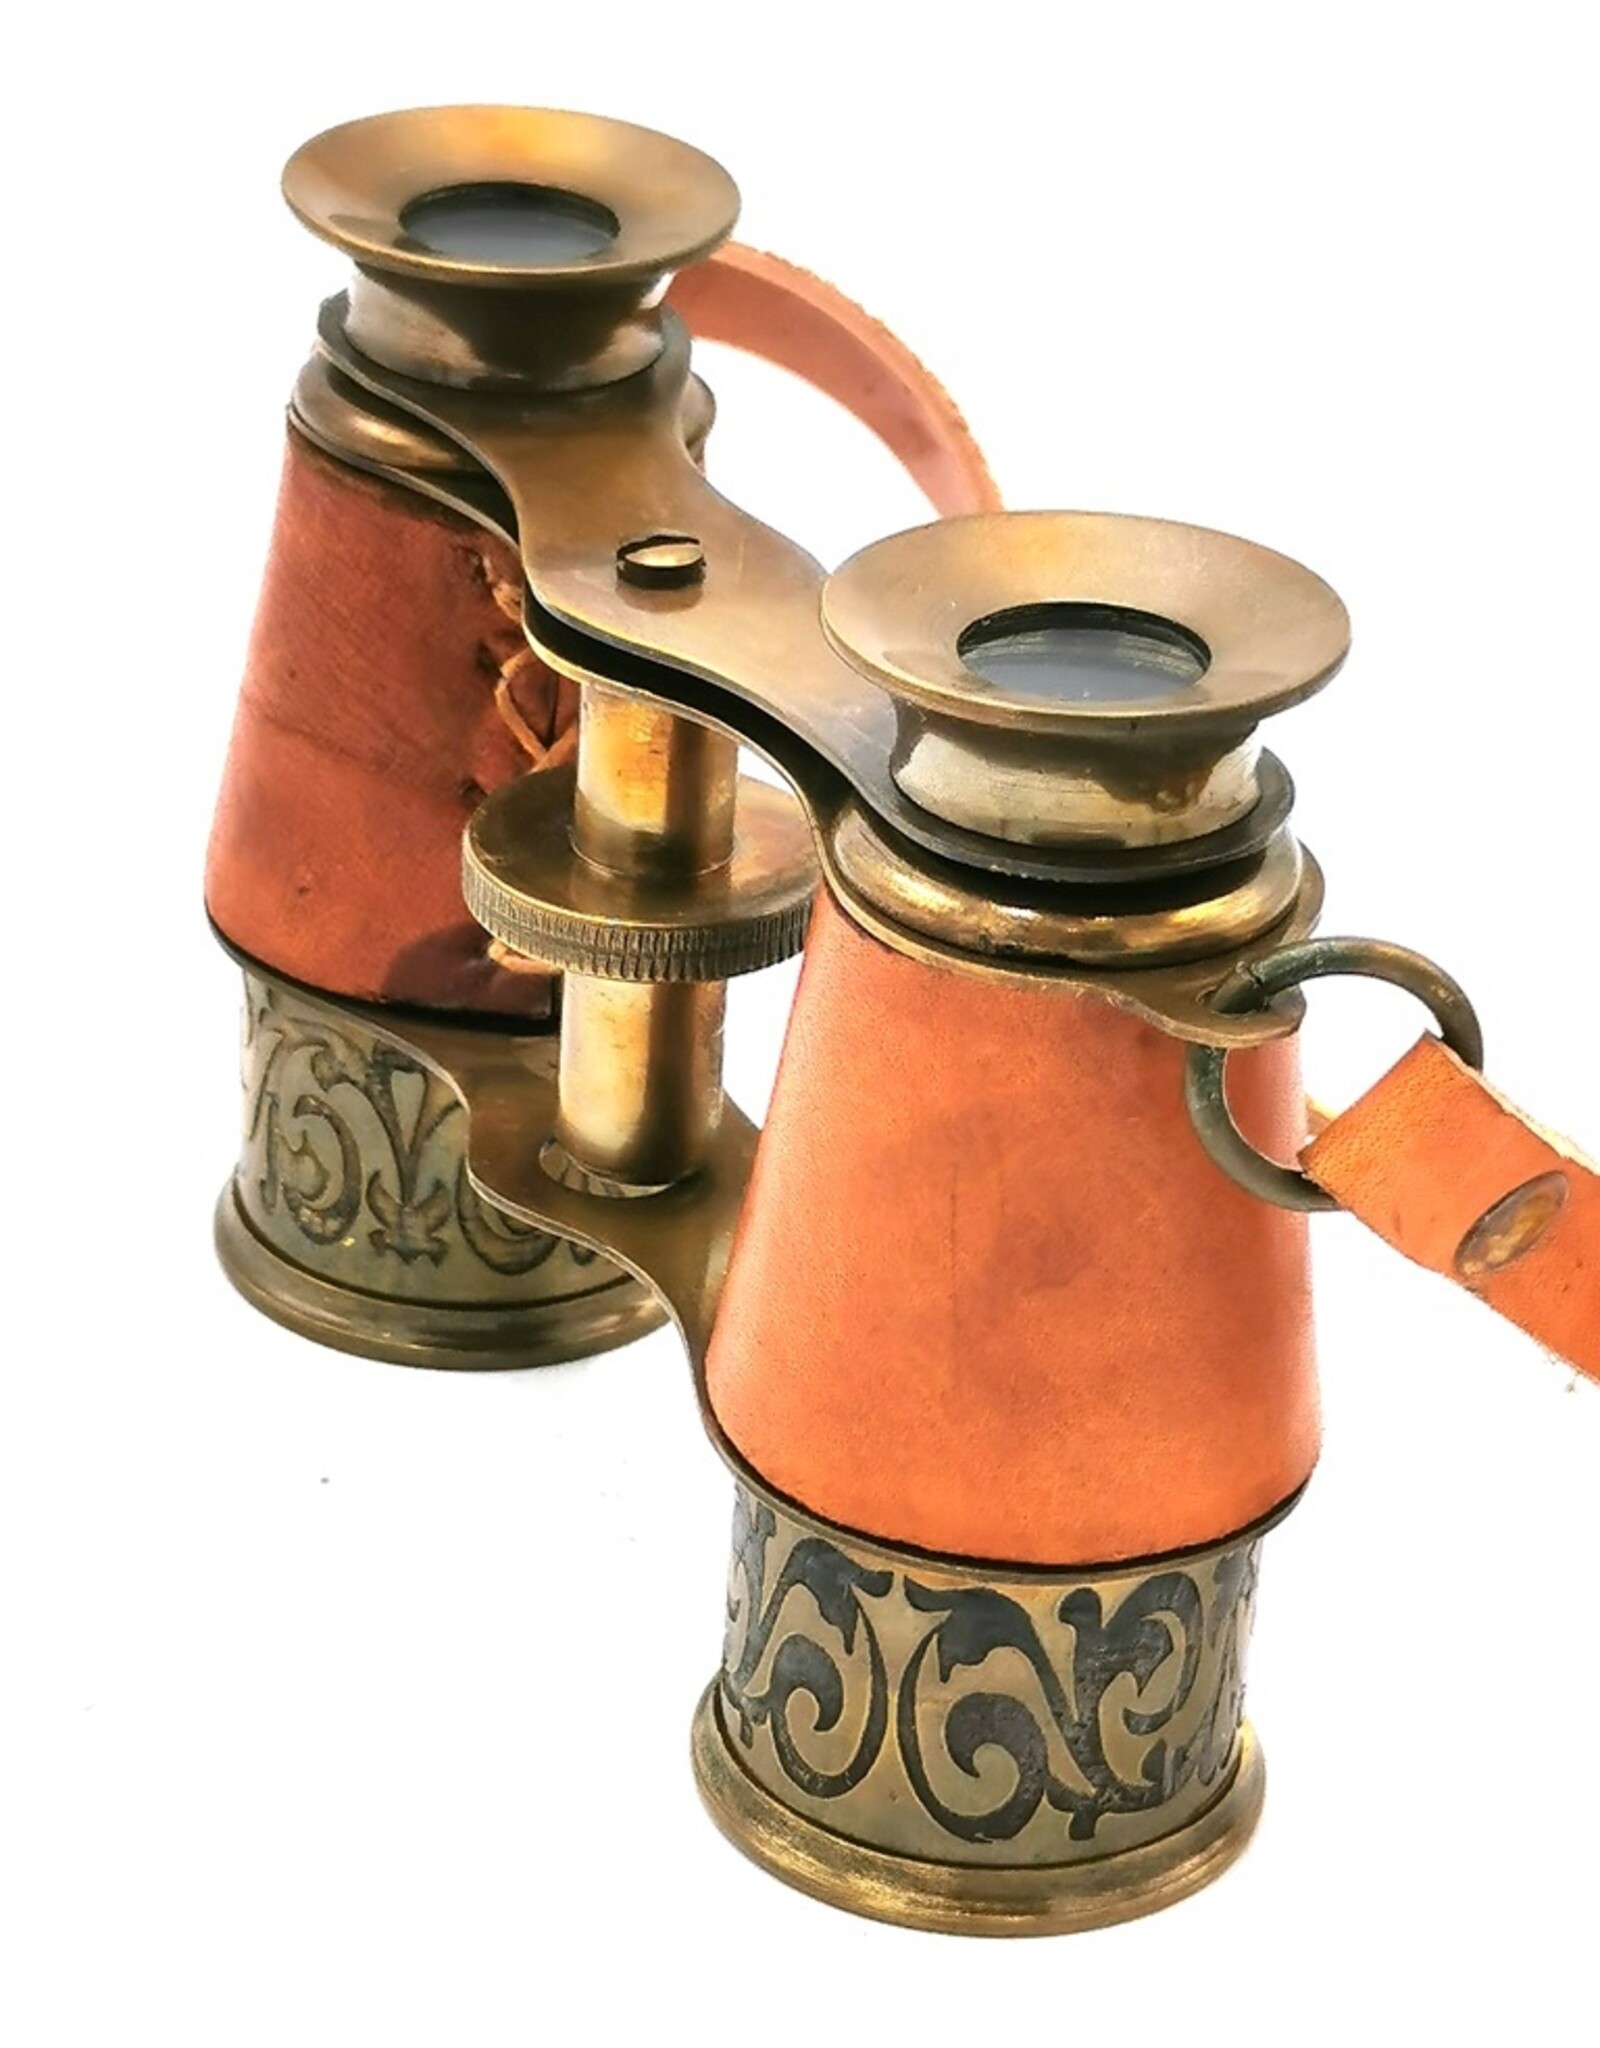 AWG Giftware & Lifestyle - Ornate Opera Glasses Brass Antique look